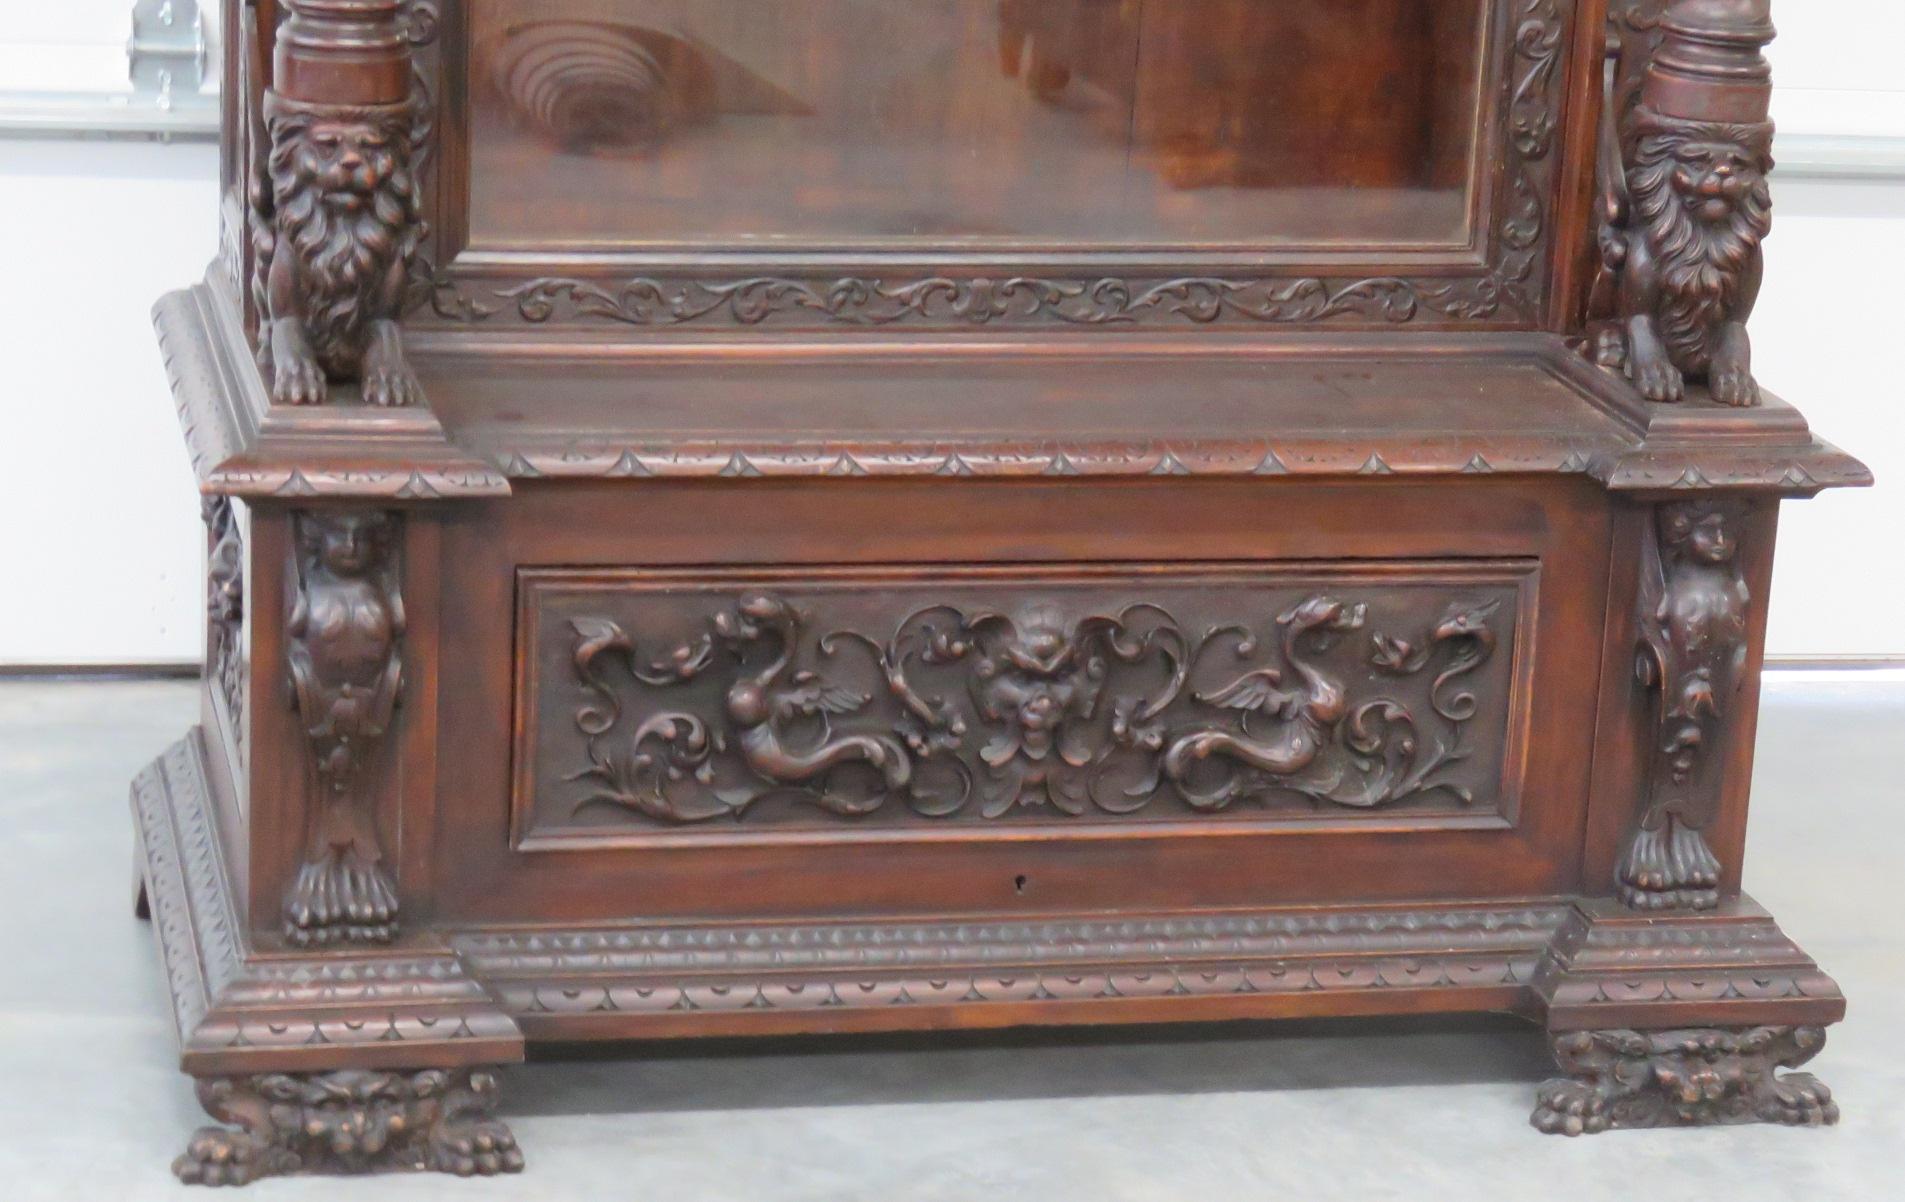 Antique winged griffin carved china cabinet with one door containing 3 shelves over 1 drawer.